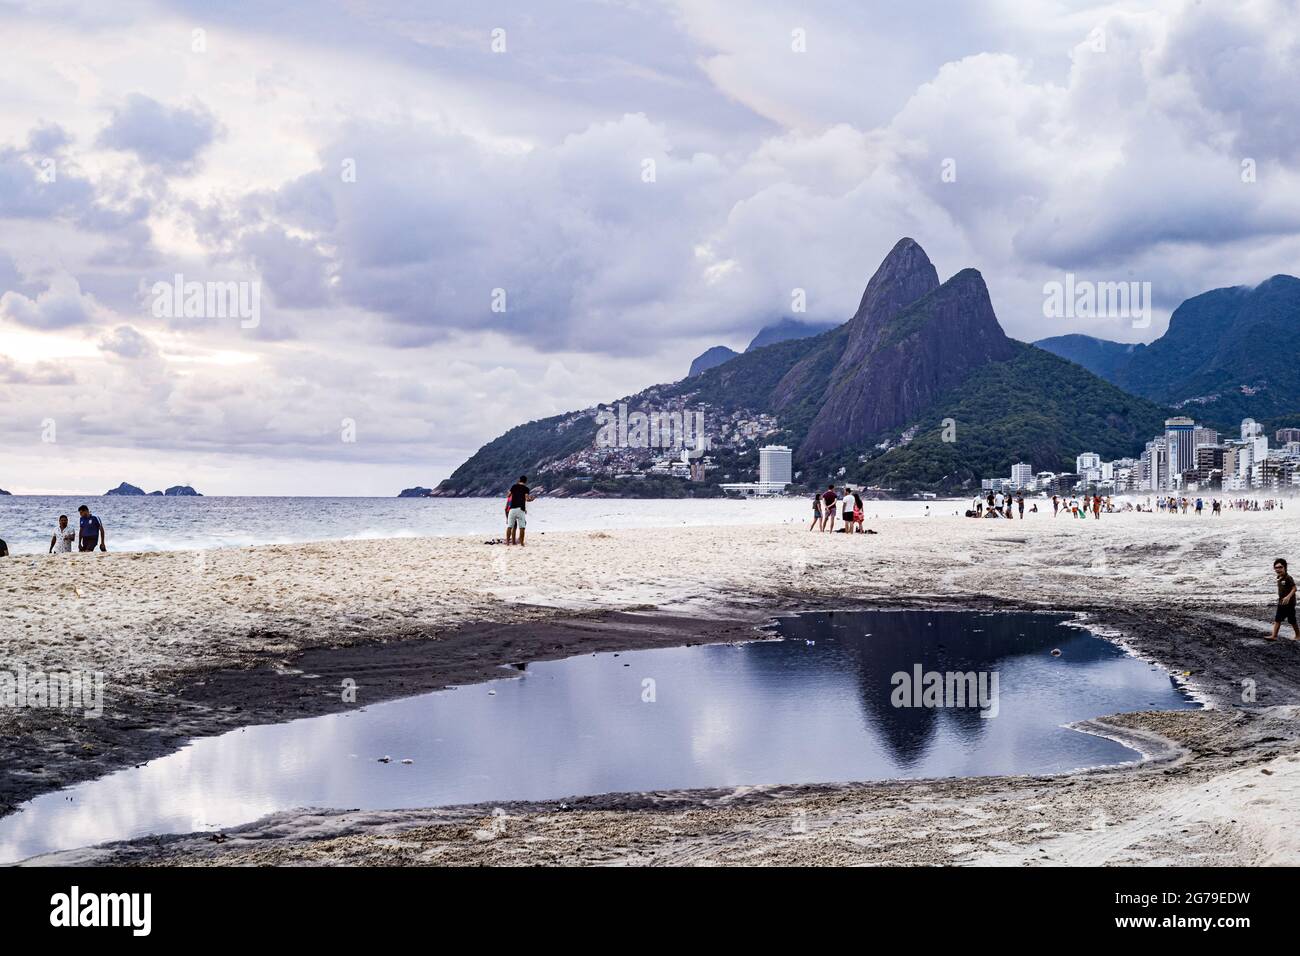 Big Puddle of water after rain reflecting Two Brothers Mountain (Dois Irmaos) at the beach of Ipanema/Leblon in Rio de Janeiro, Brazil. Leica M10 Stock Photo